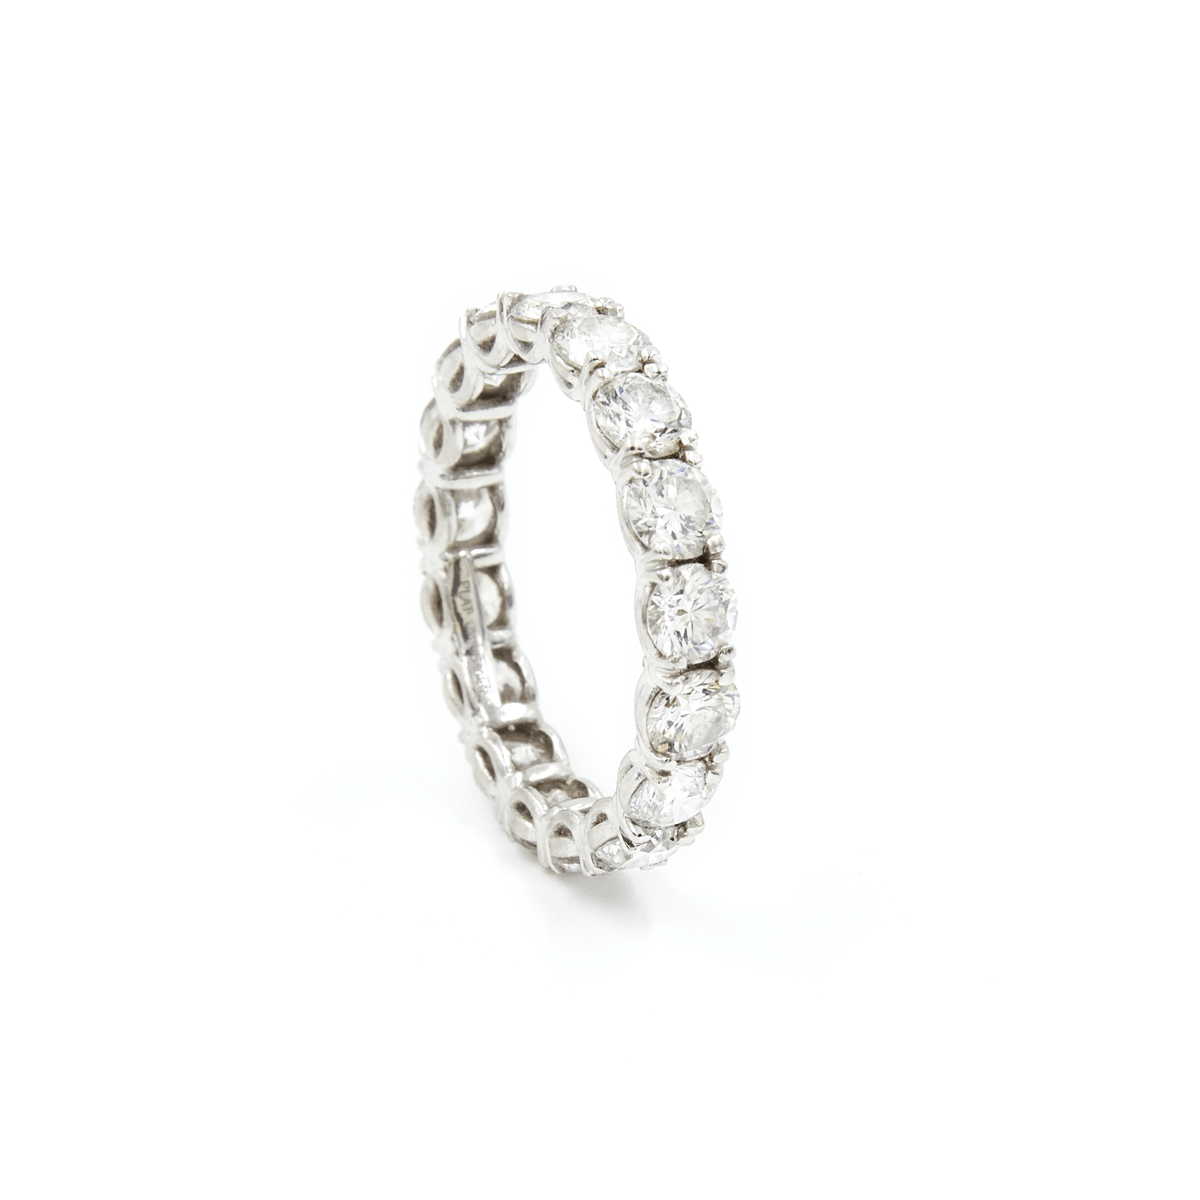 CHRIS AIRE ETERNITY BAND - Chris Aire Fine Jewelry & Timepieces